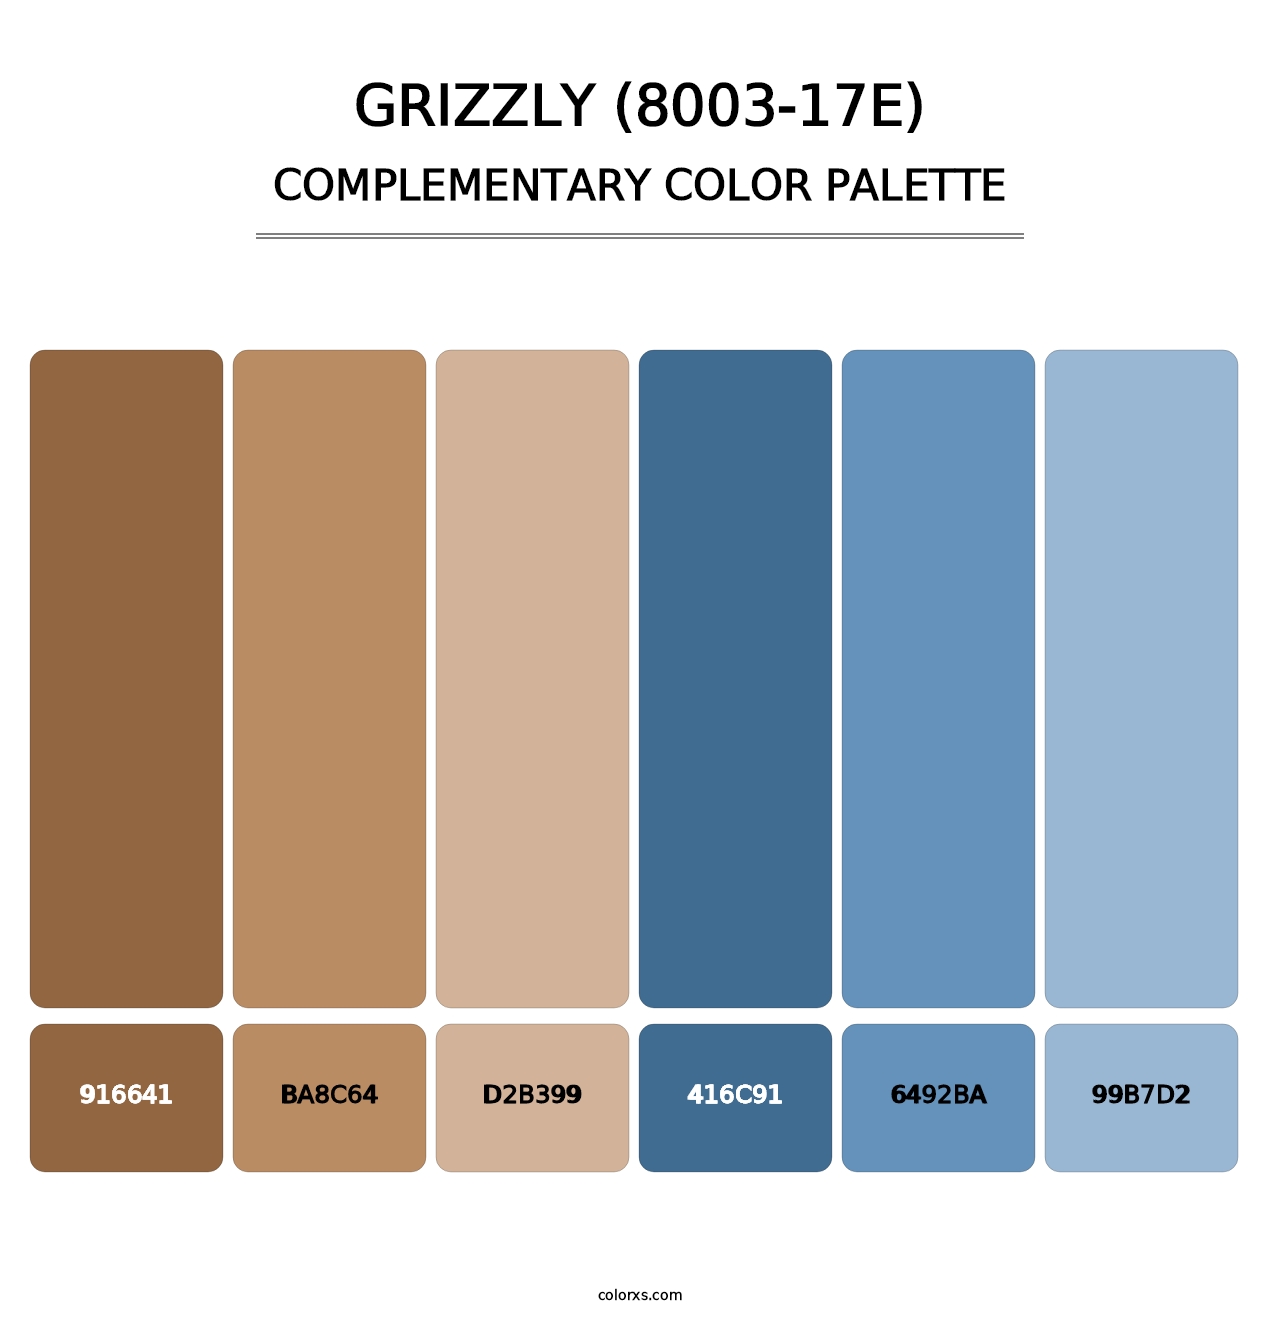 Grizzly (8003-17E) - Complementary Color Palette